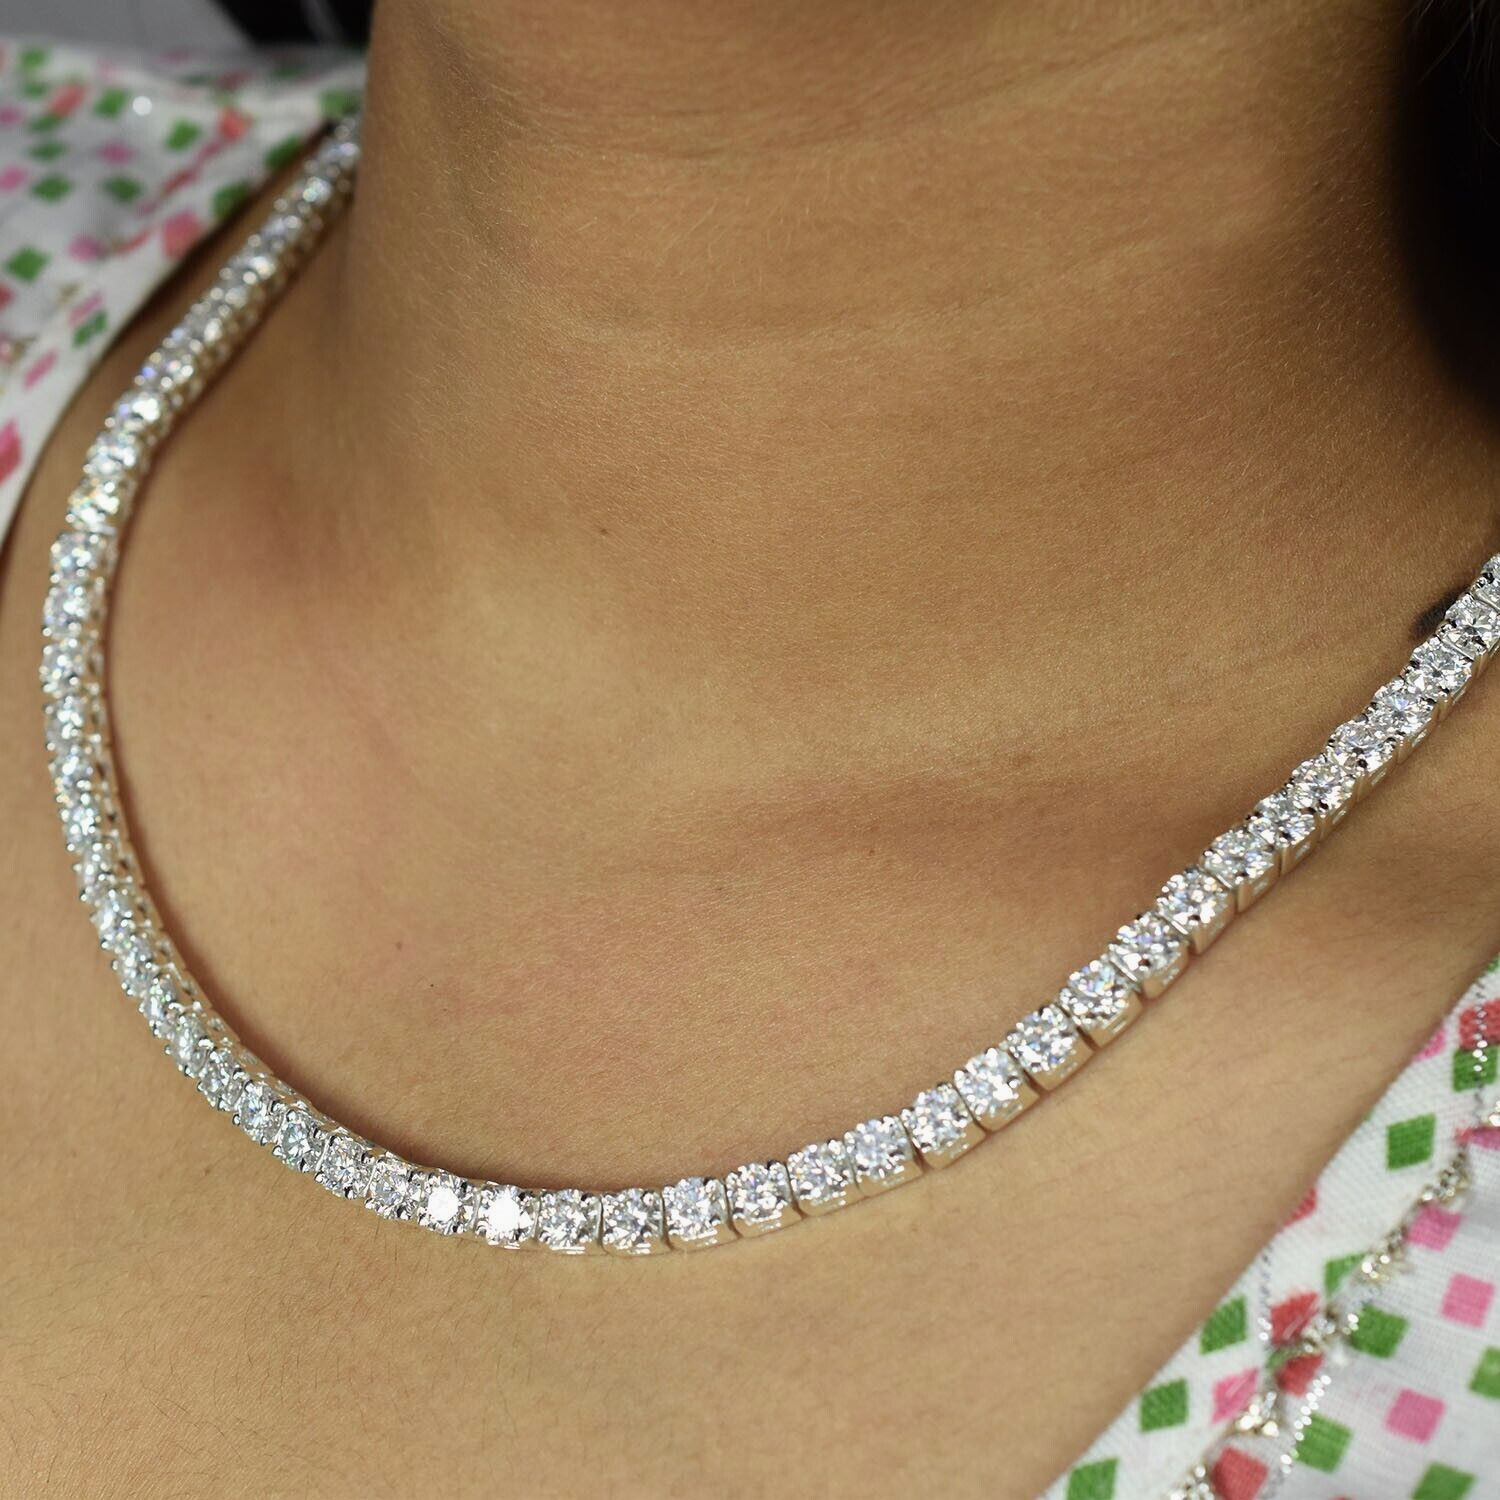 Gorgeous 18 inches White Diamond Tennis Necklace, Excellent Cut & Luster VIDEO